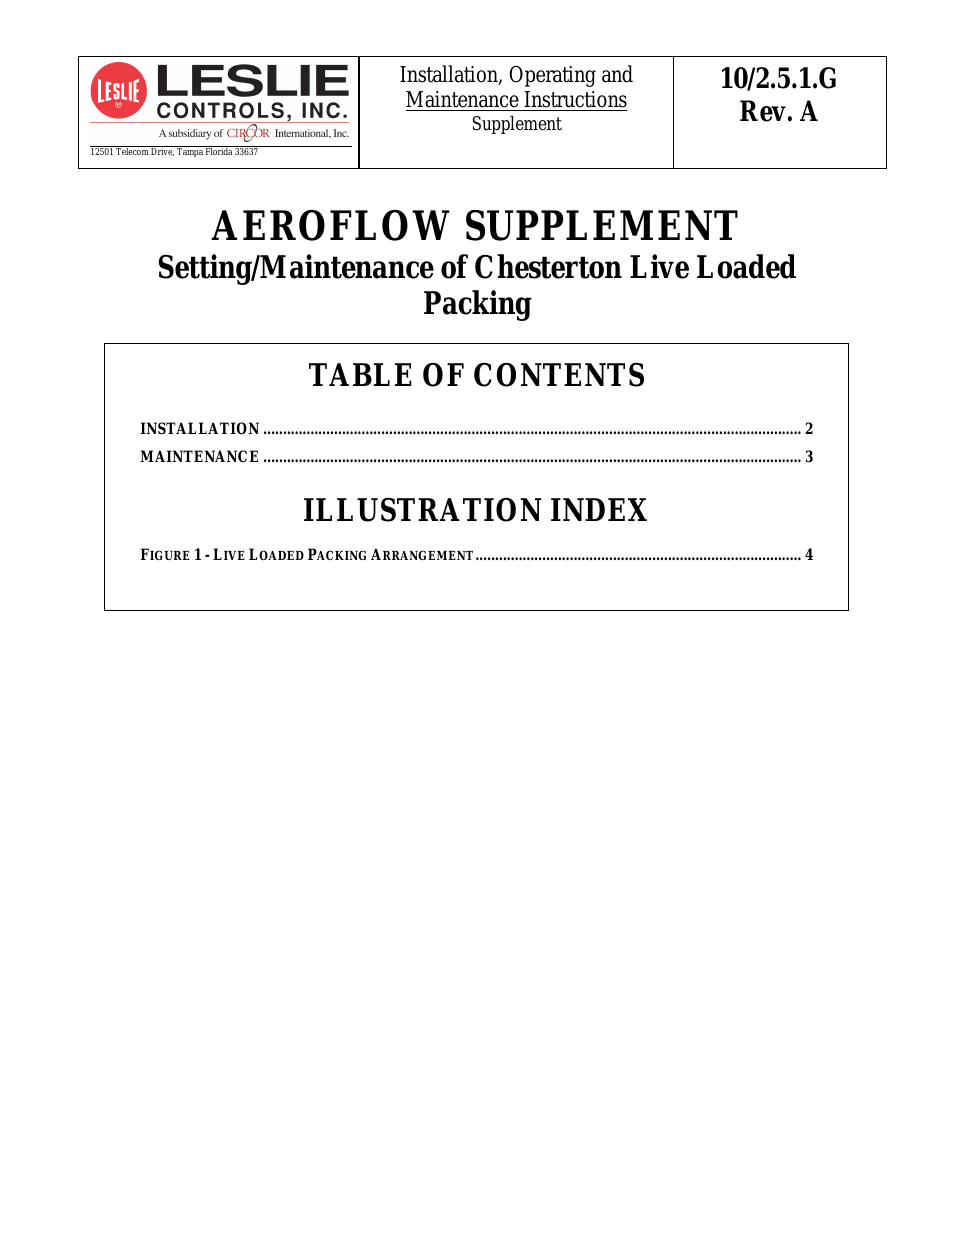 AEROFLOW SUPPLEMENT Chesterton Live Loaded Packing